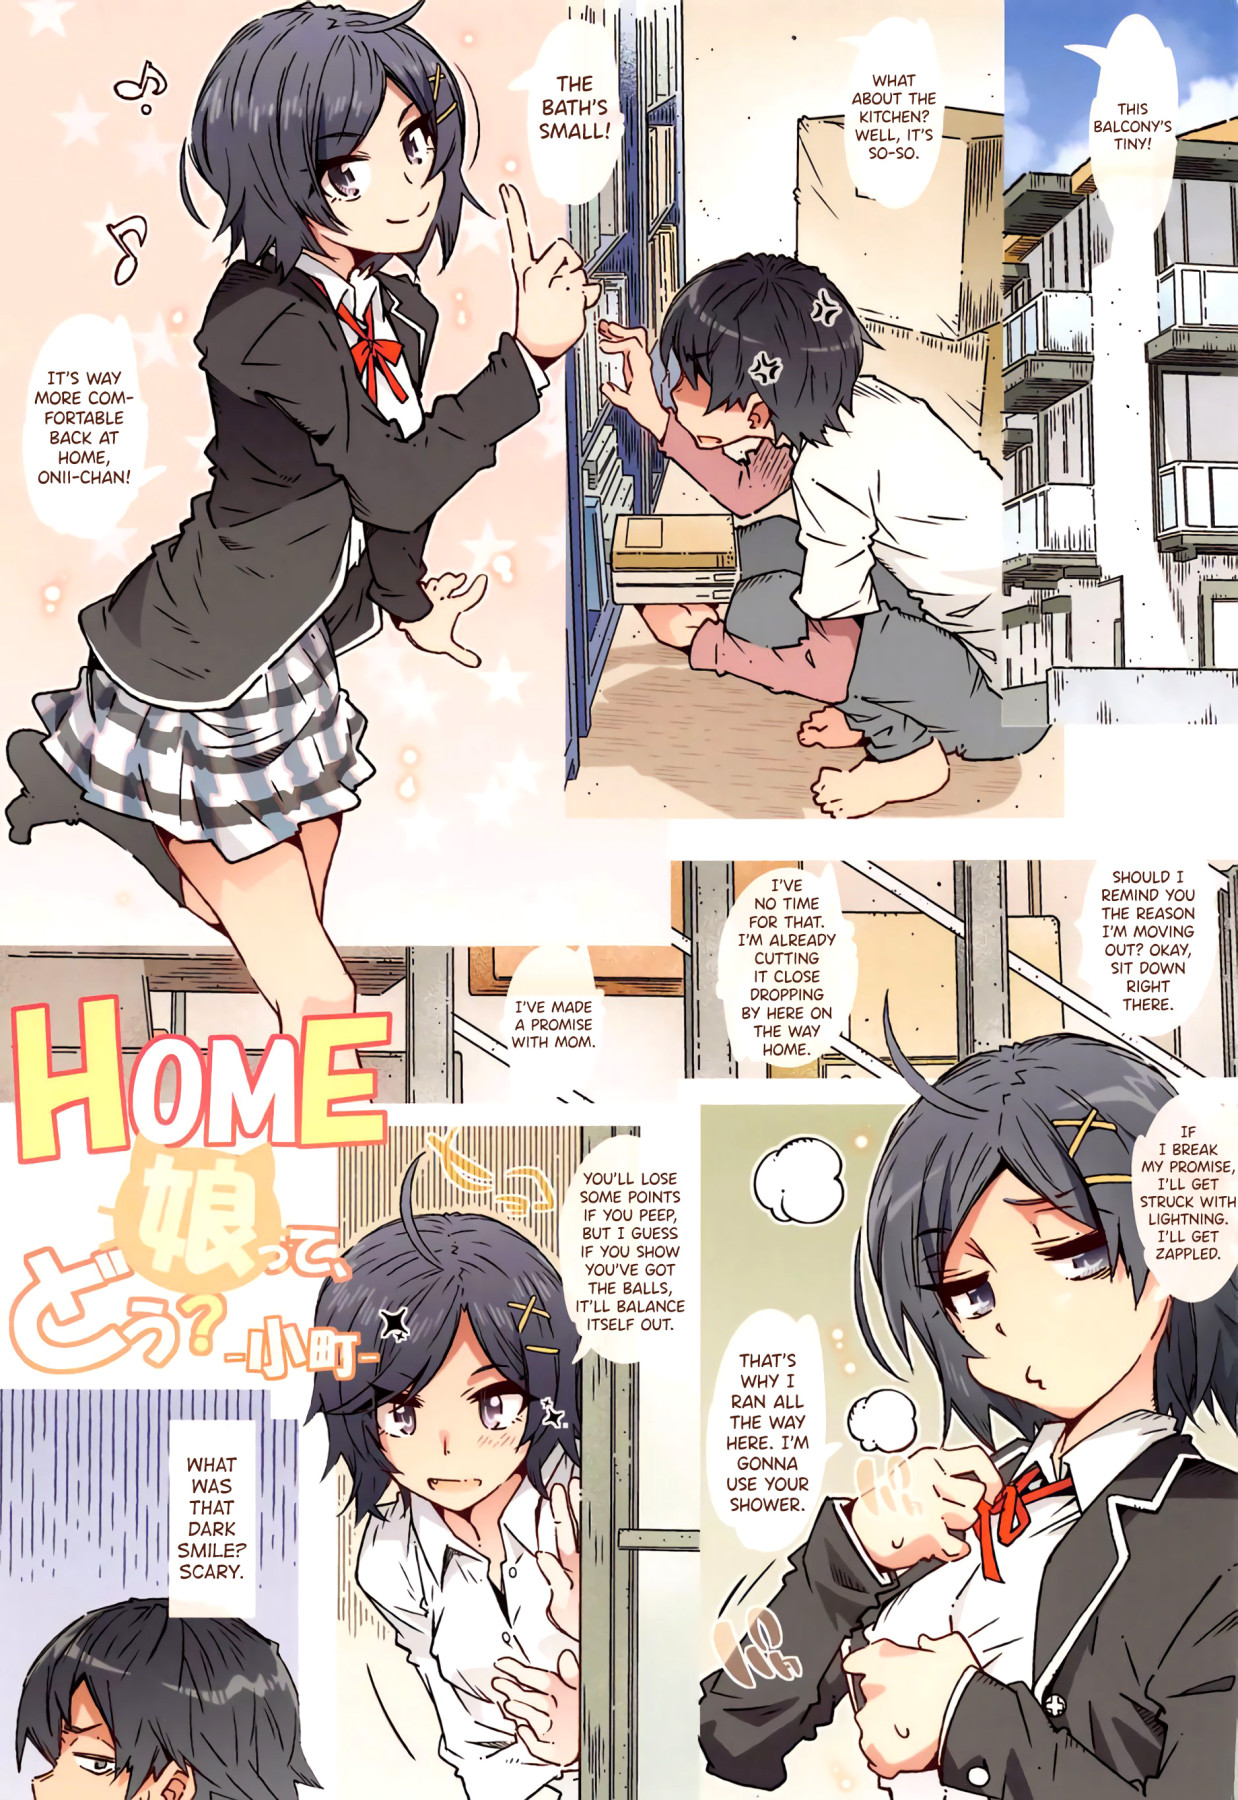 Hentai Manga Comic-How's This For a Girl At Home?-Read-3